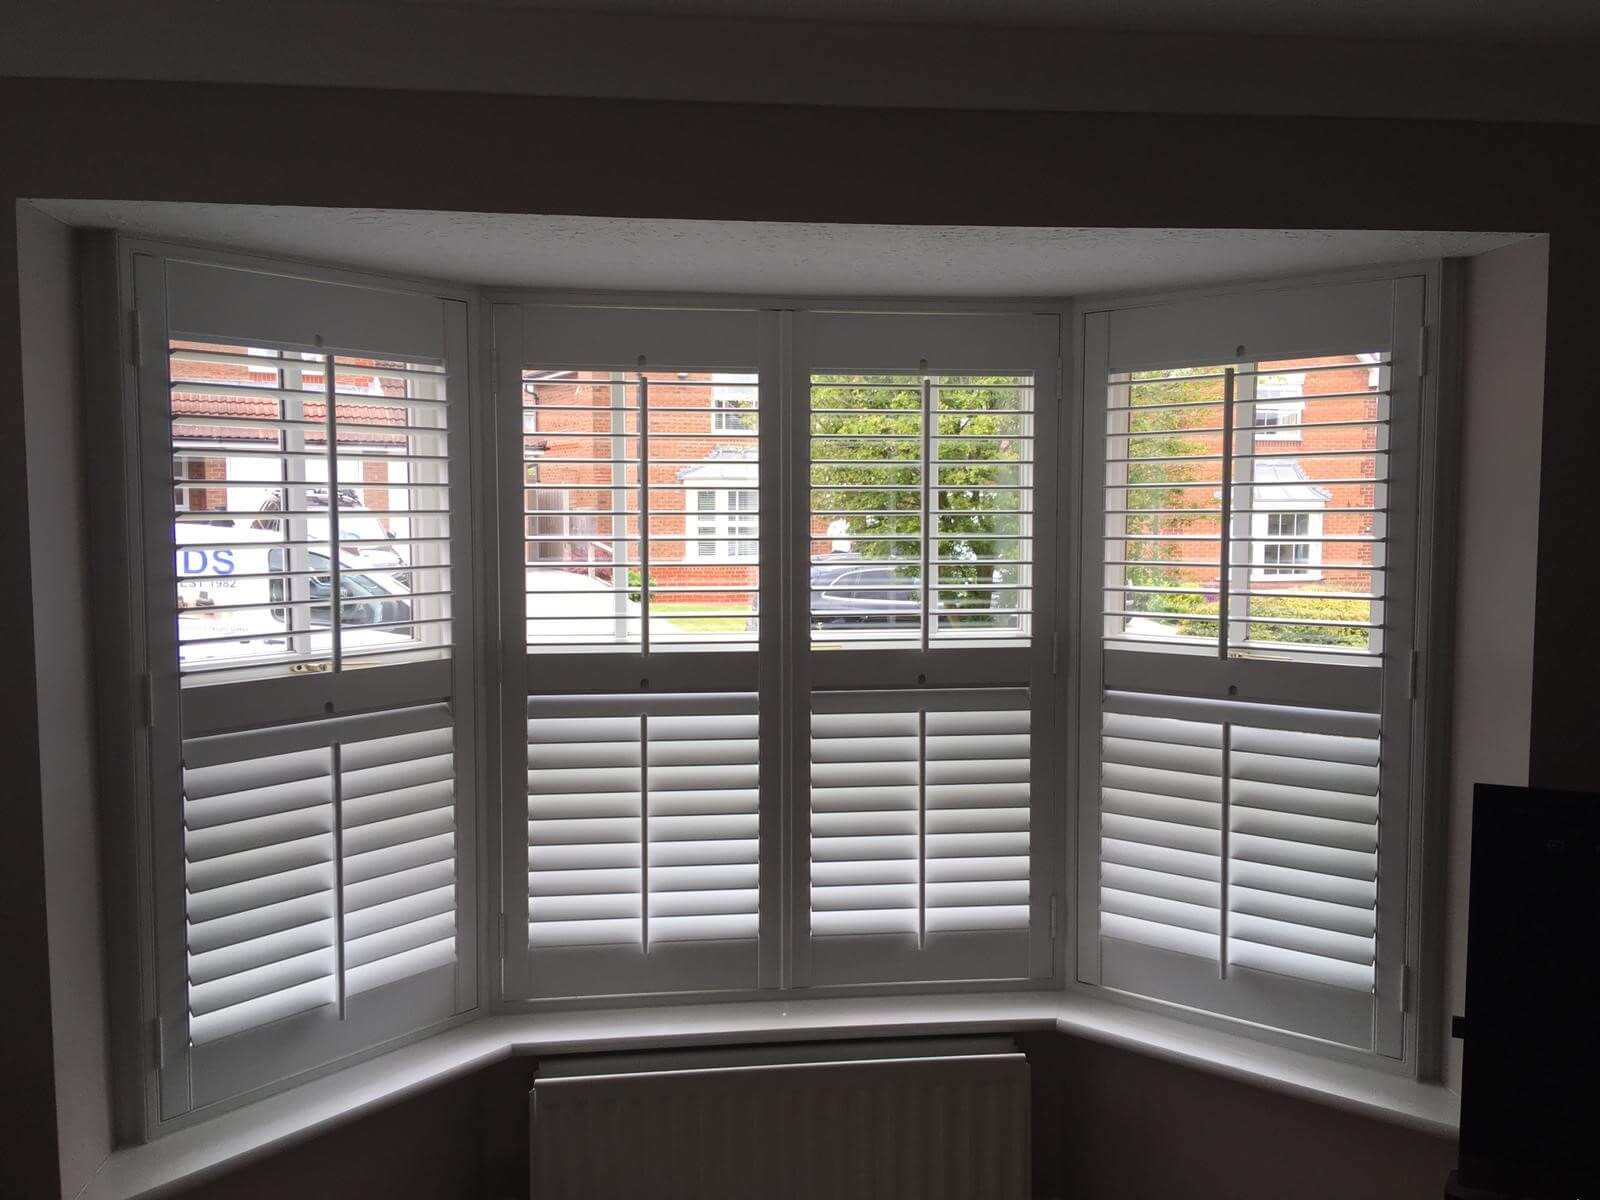 Suppliers of Waterproof Plantation Shutters For Bathrooms